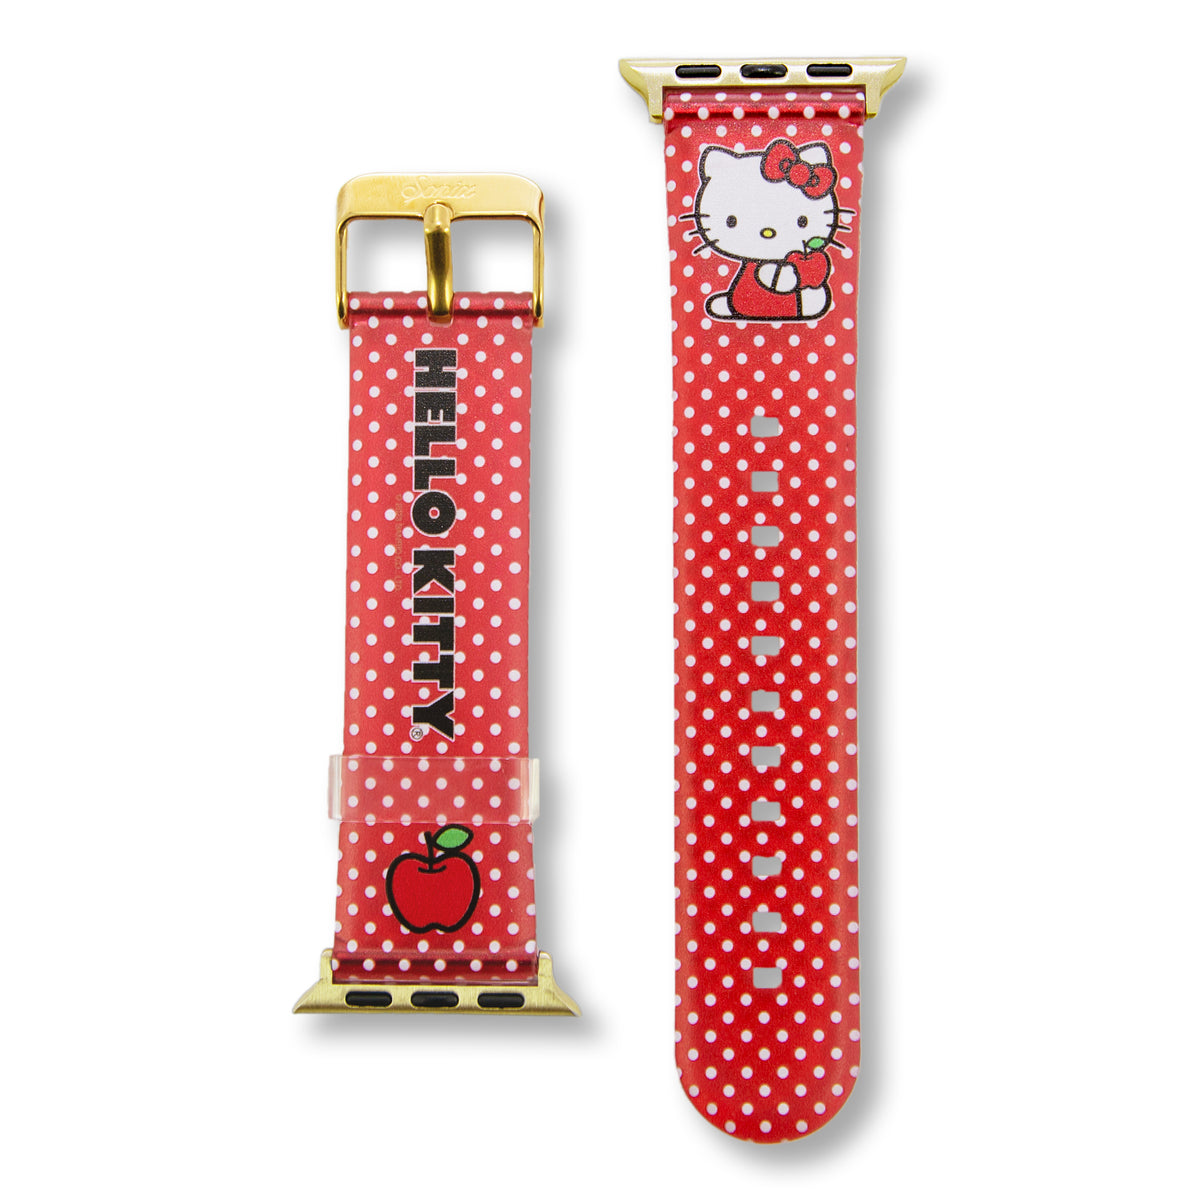 Hello Kitty x Sonix Classic Black Leather Watch Band